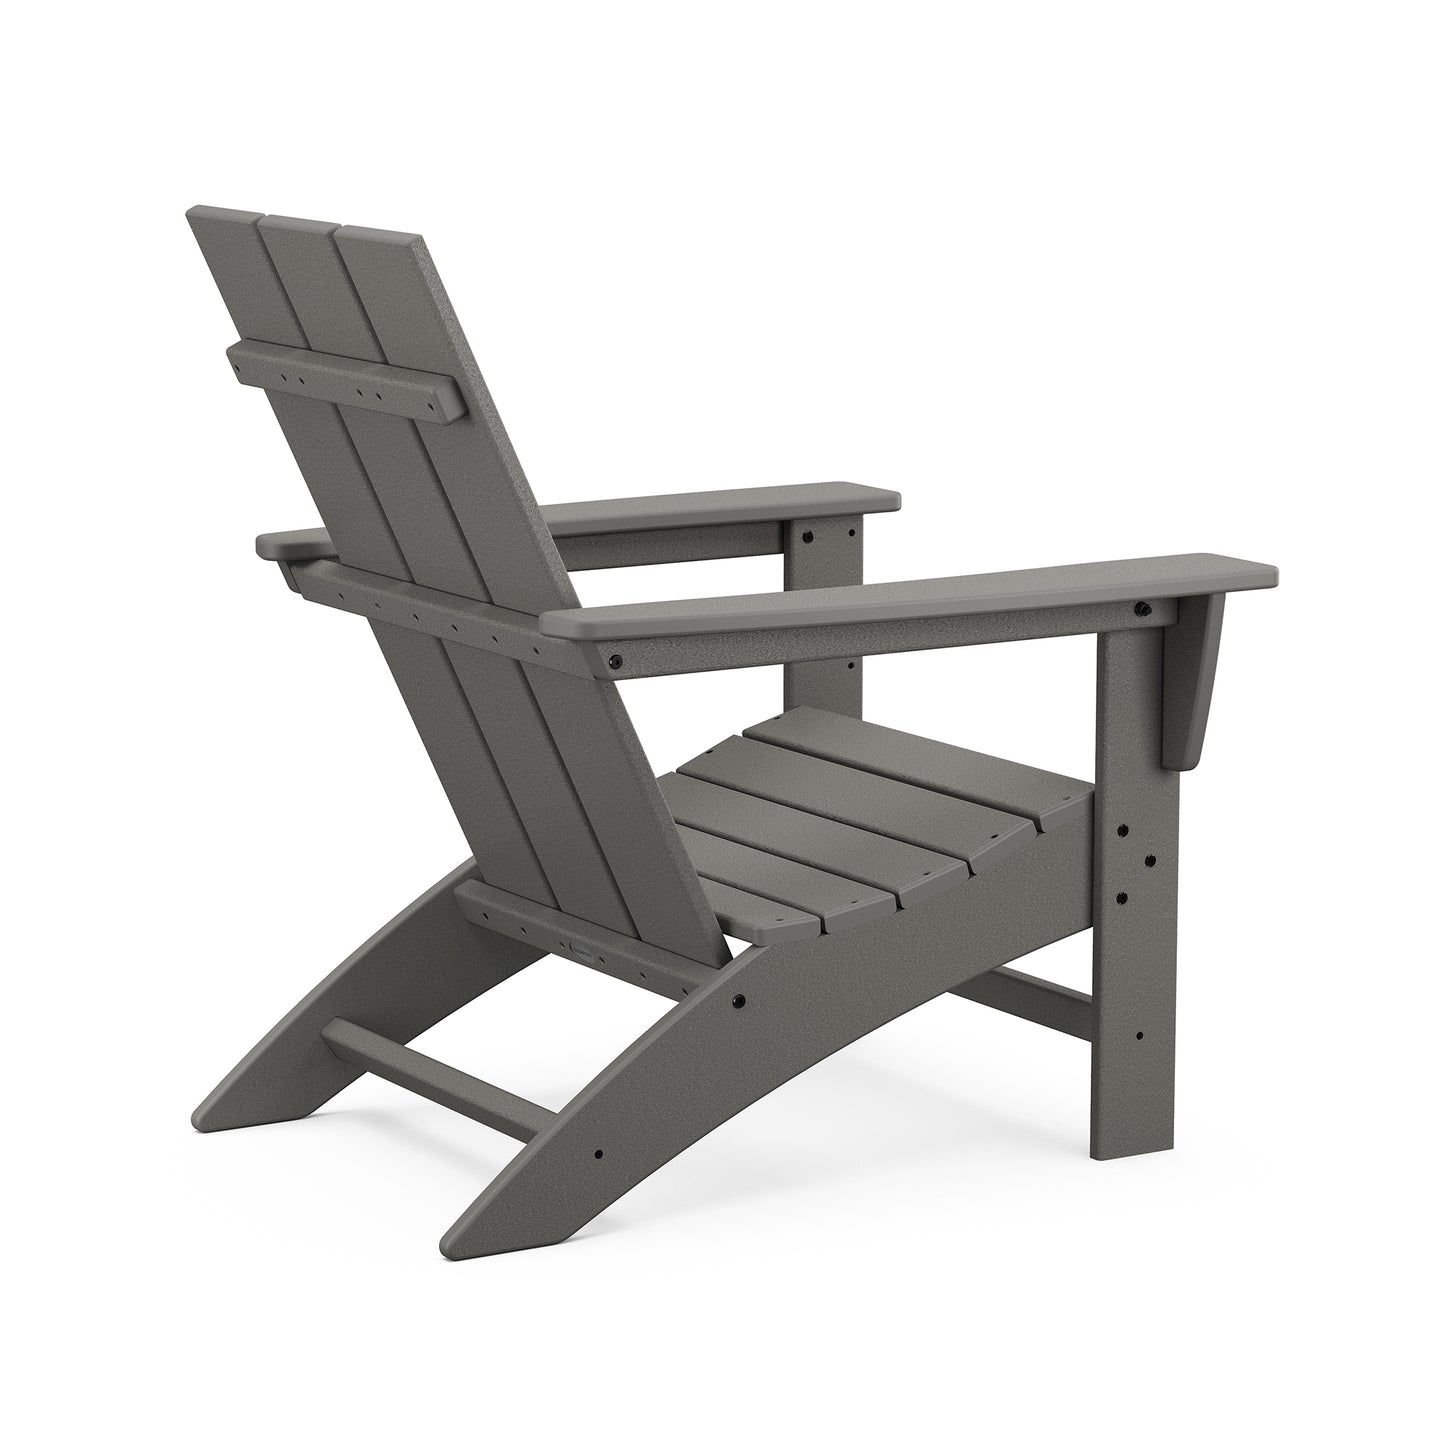 An outdoor gray Modern Adirondack chair made from POLYWOOD lumber, showcased against a clean white background.